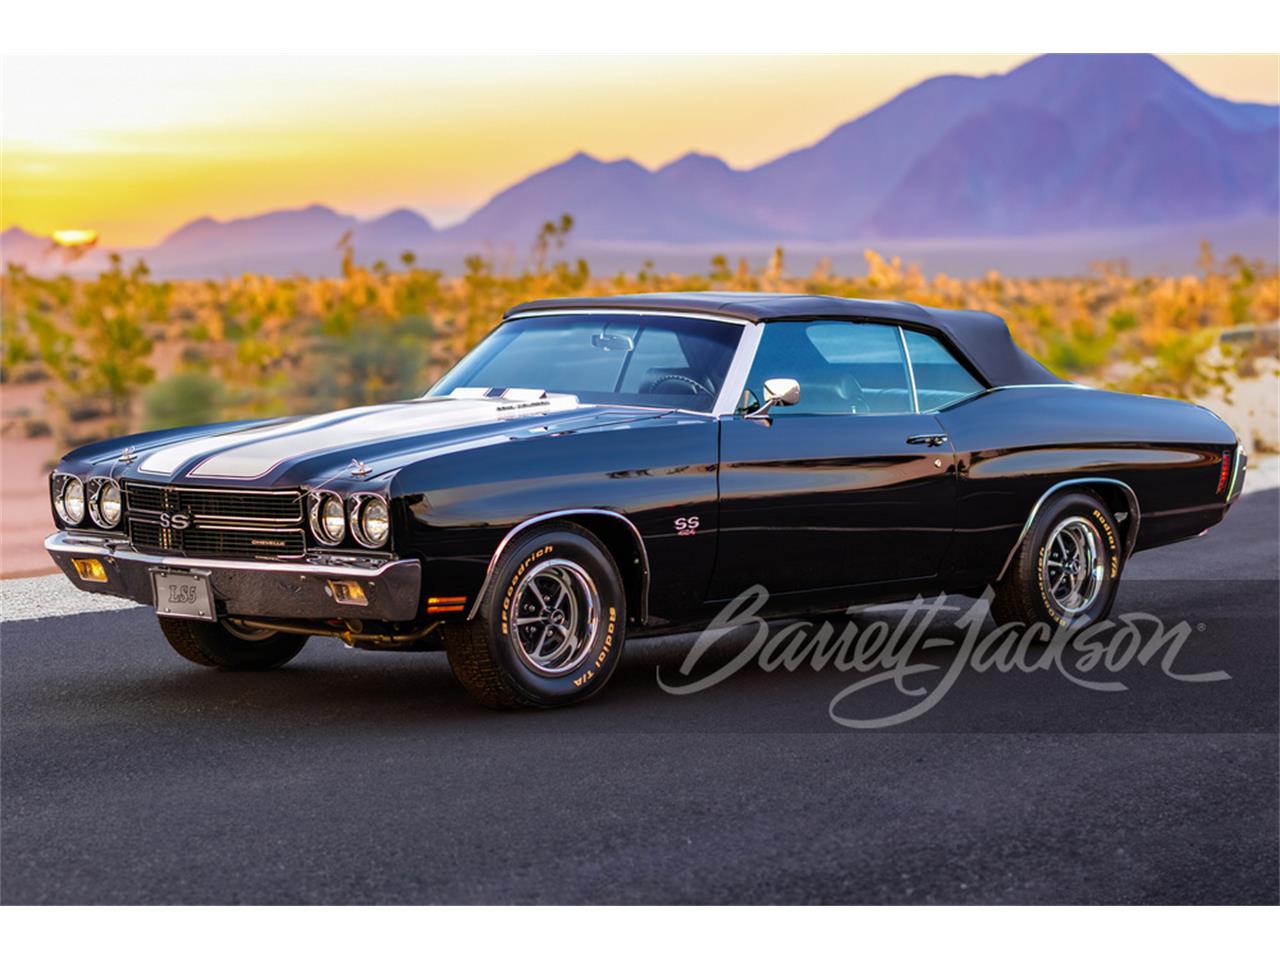 For Sale at Auction: 1970 Chevrolet Chevelle SS in Scottsdale, Arizona for sale in Scottsdale, AZ